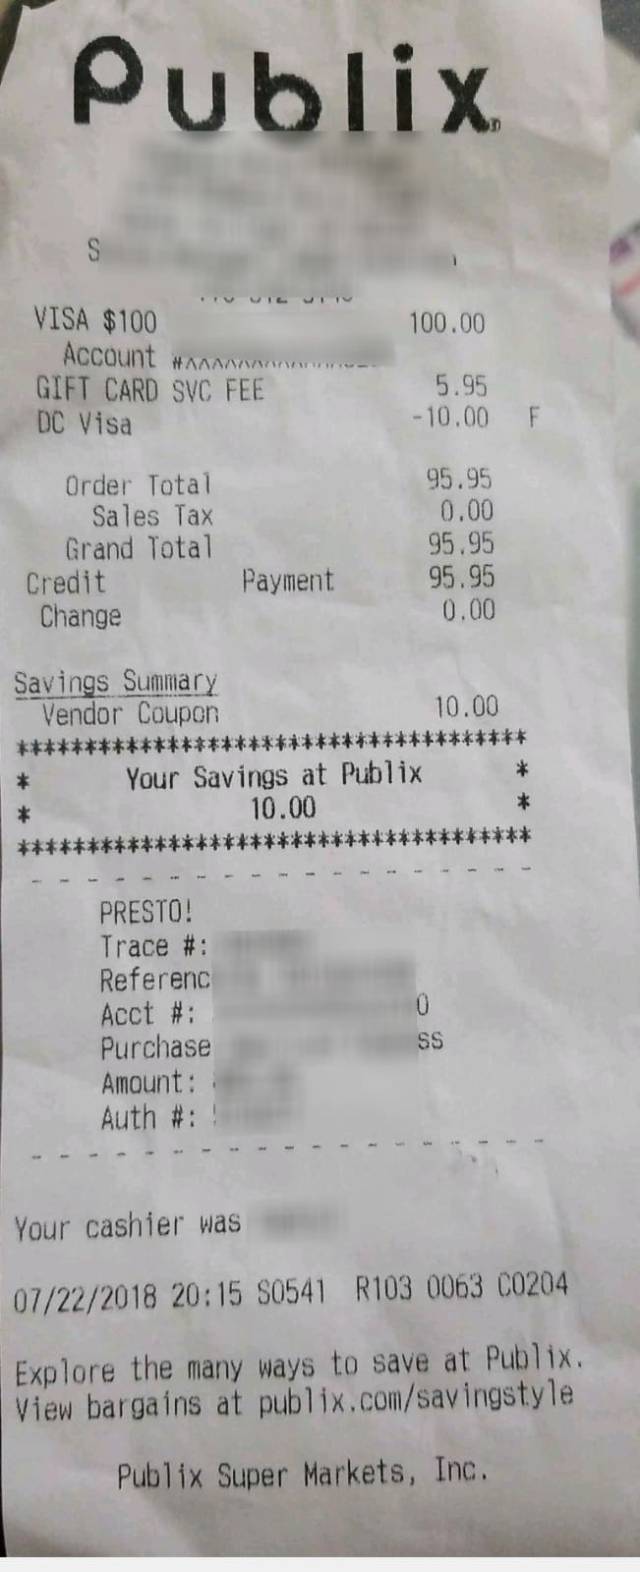 Publix Instant 10 Rebate On Purchase Of 100 Visa Gift Card Save Money With These Deals